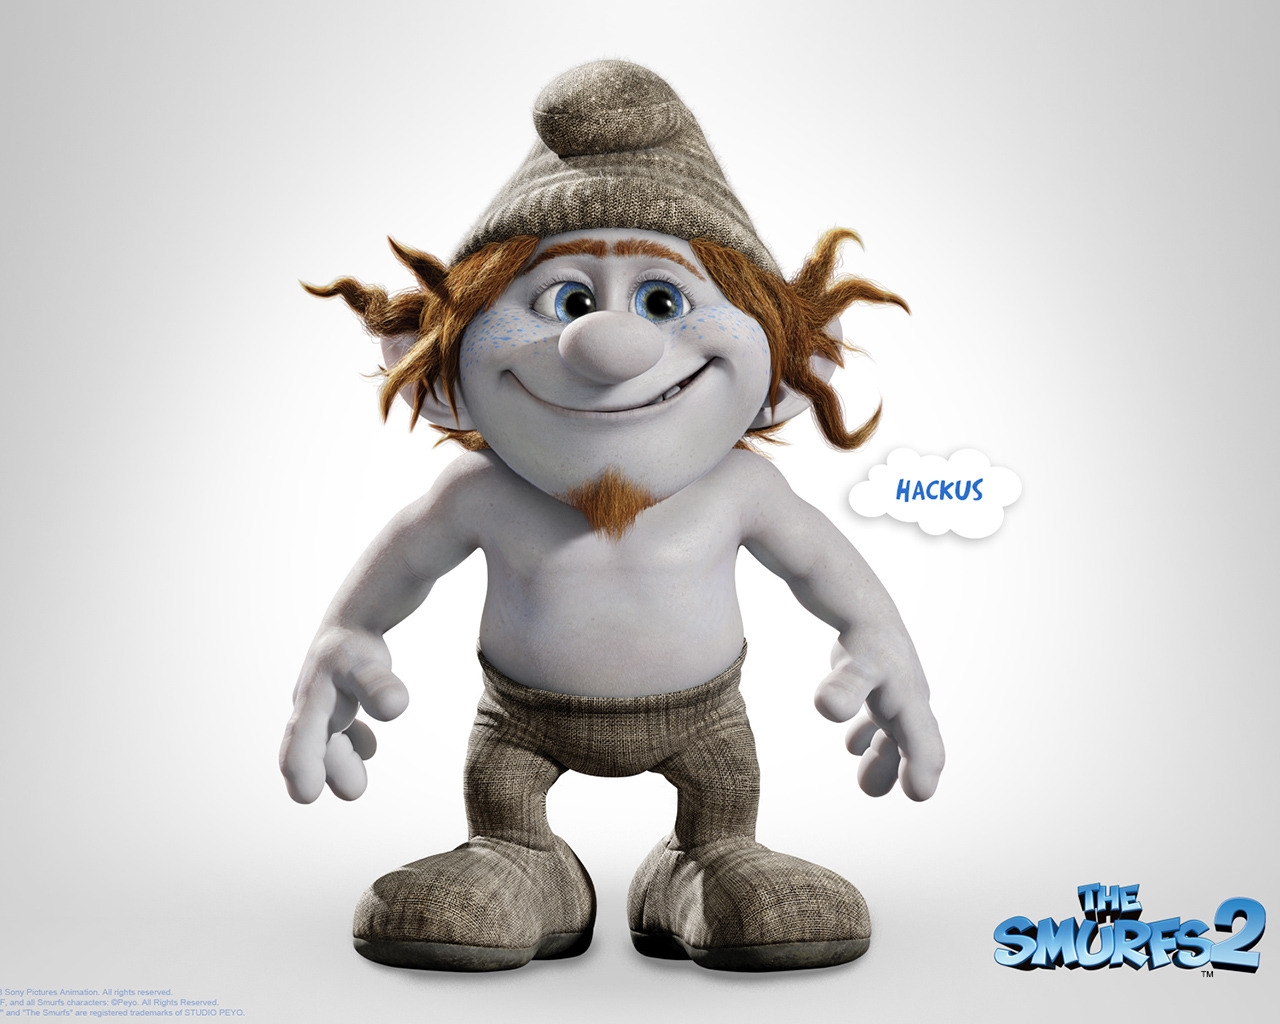 Hachus The Smurfs 2 for 1280 x 1024 resolution